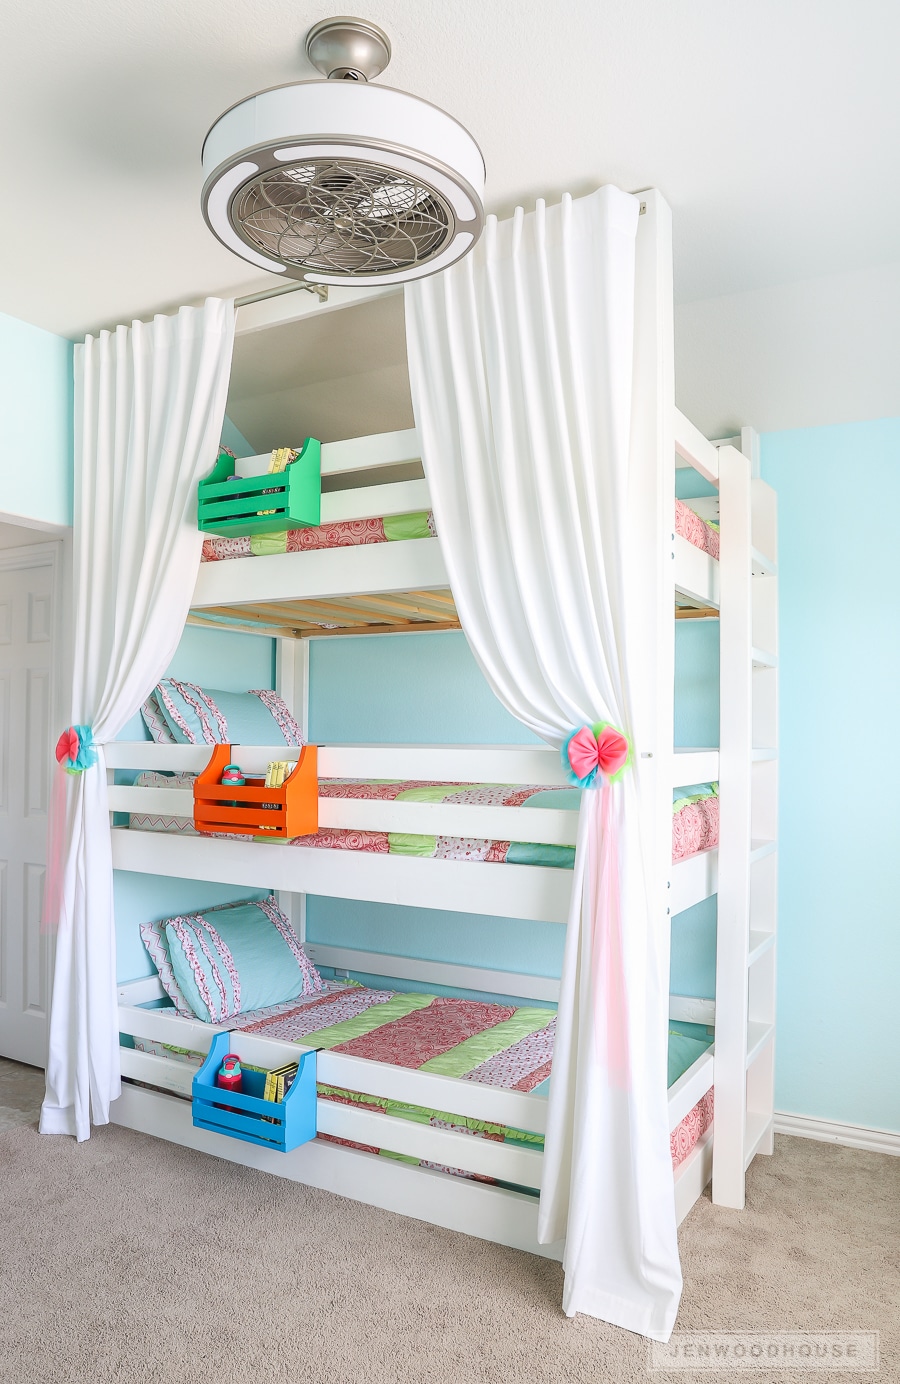 How To Build A Diy Triple Bunk Bed, Diy Bunk Beds For Small Rooms